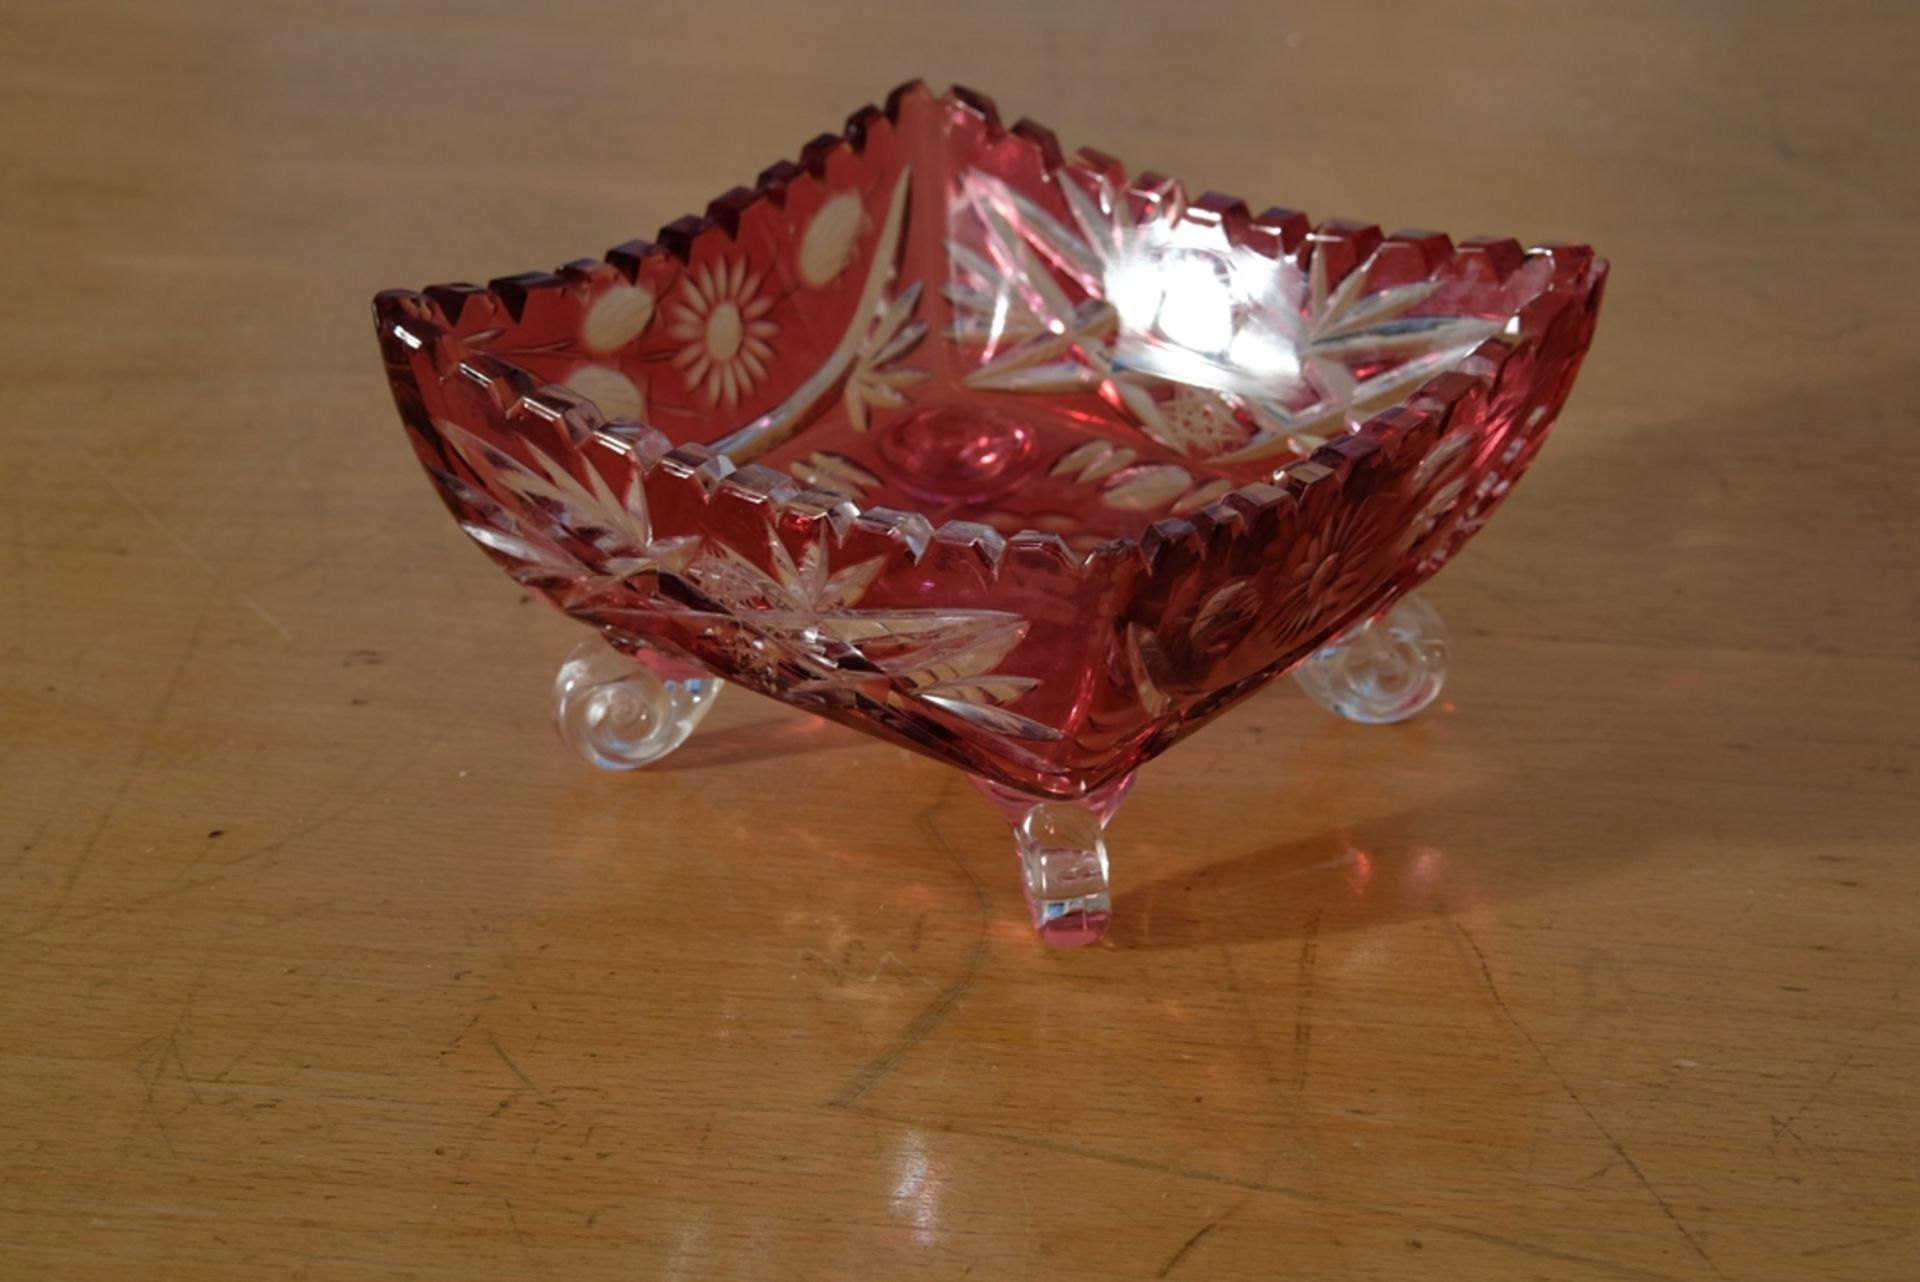 Glass bowl, probably Murano, red glass, engraved with floral ornaments, 16 x 16 x 9 cm. - Image 2 of 2